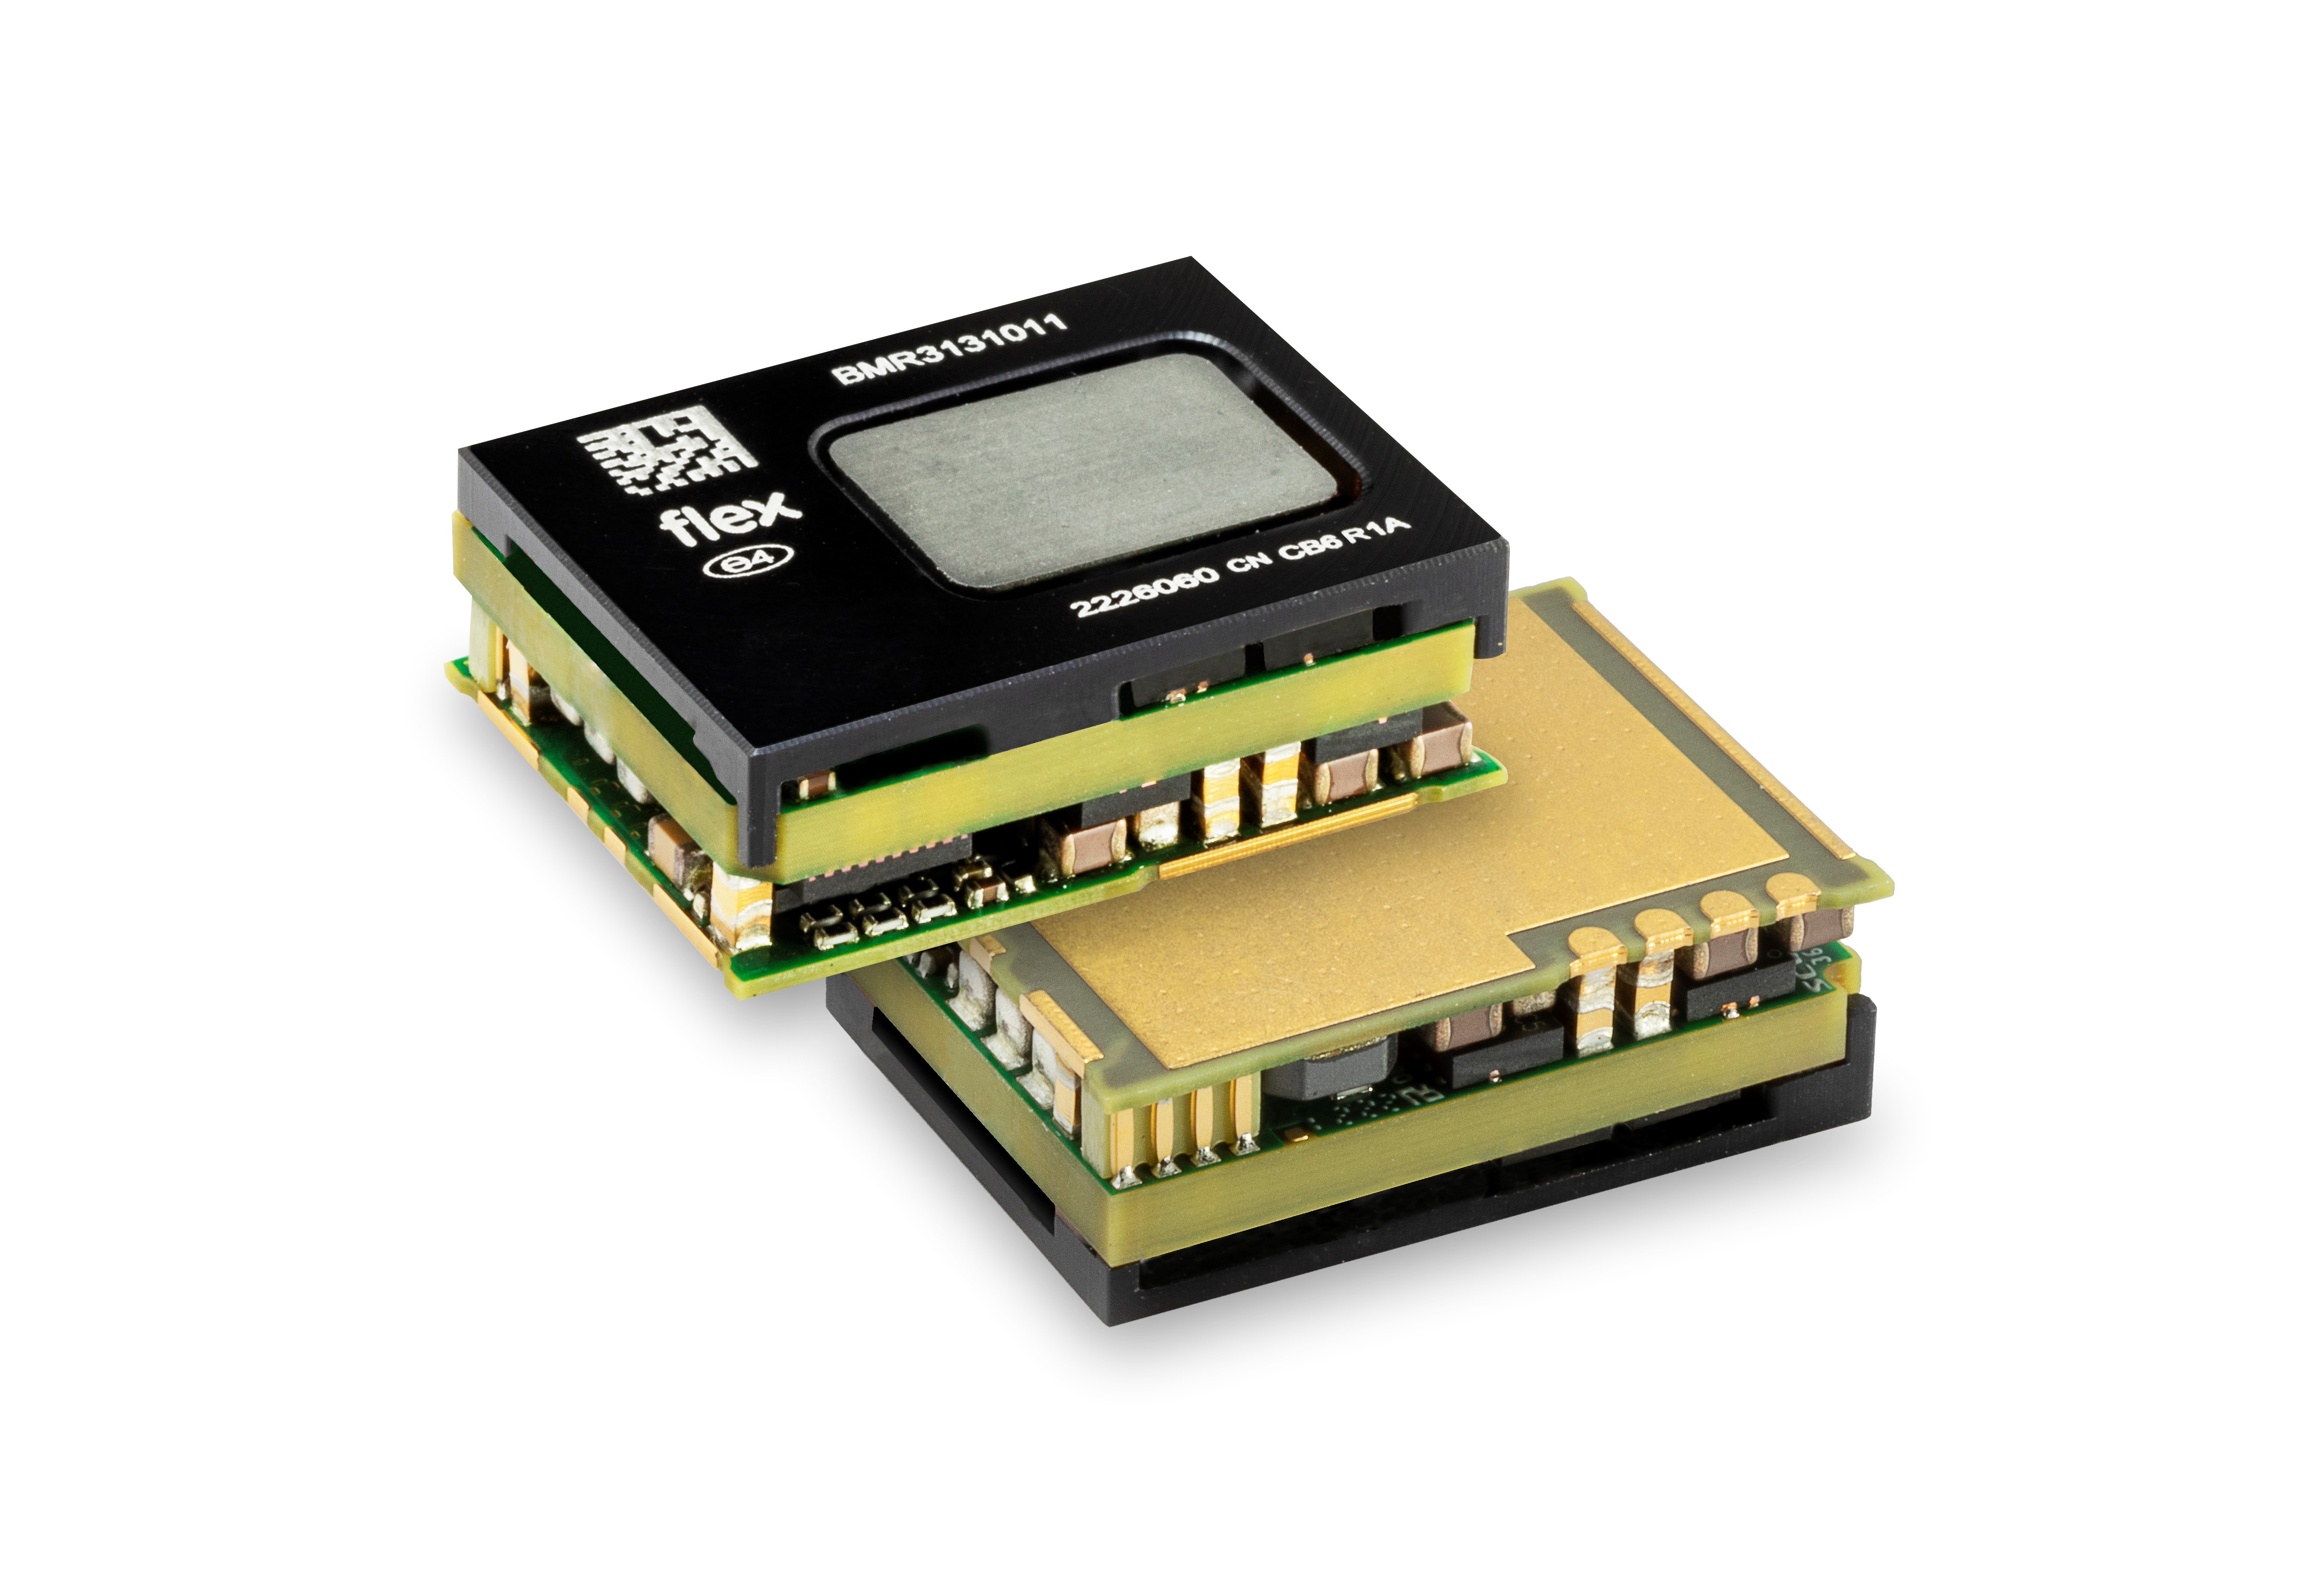 Flex Power Modules Teams up with onsemi to Develop Ultra-Small Intermediate Bus Converter